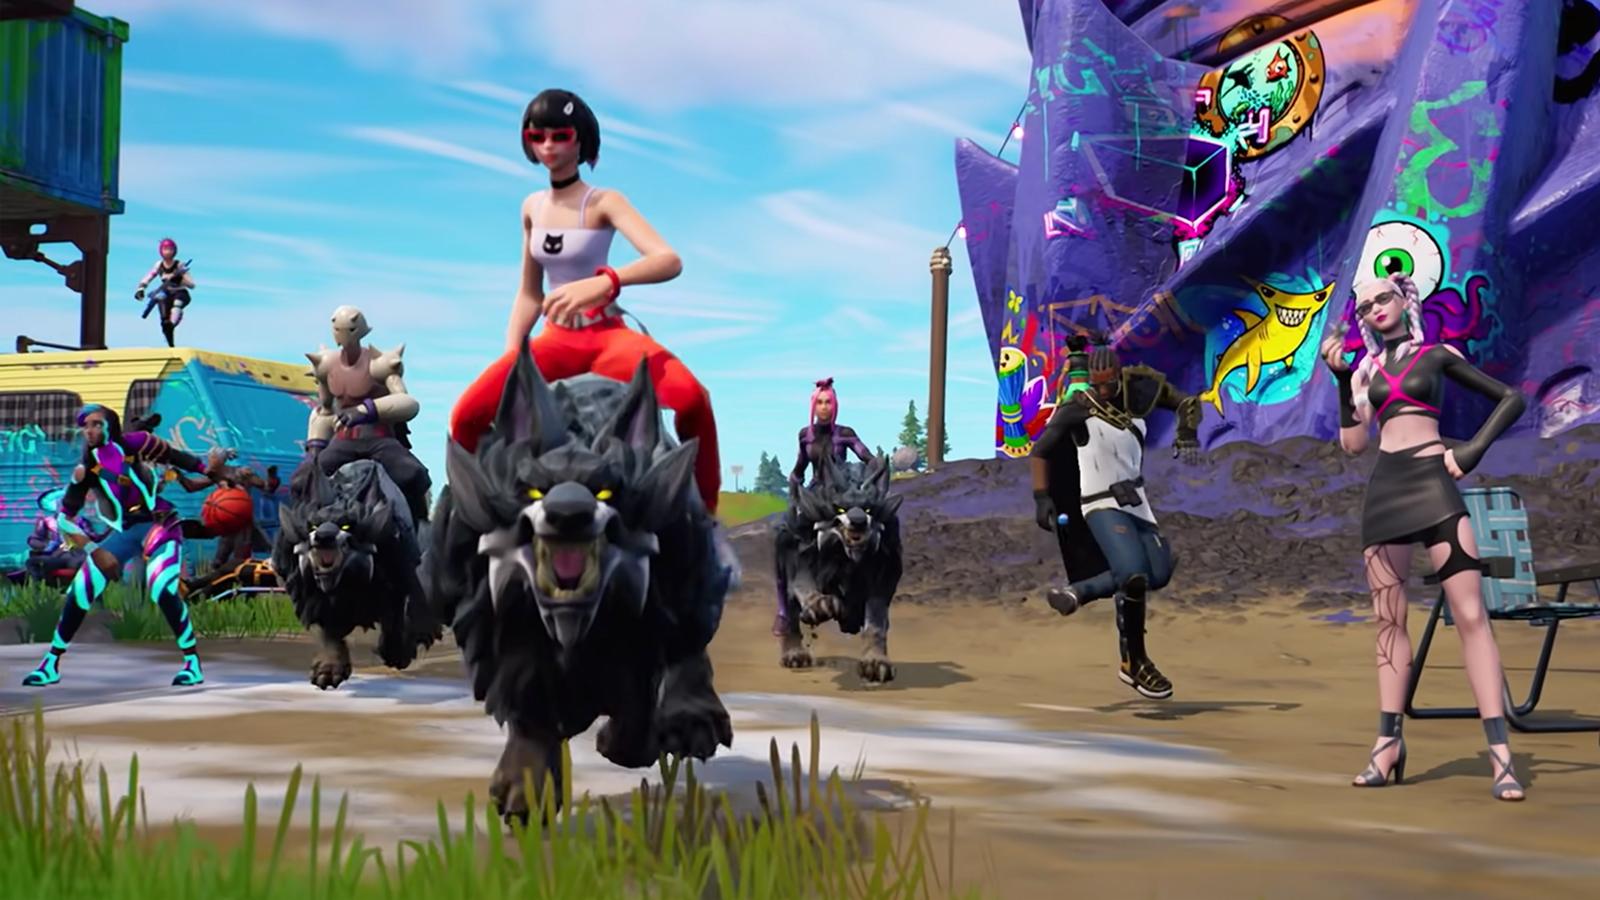 A Fortnite player riding a wild animal wolf